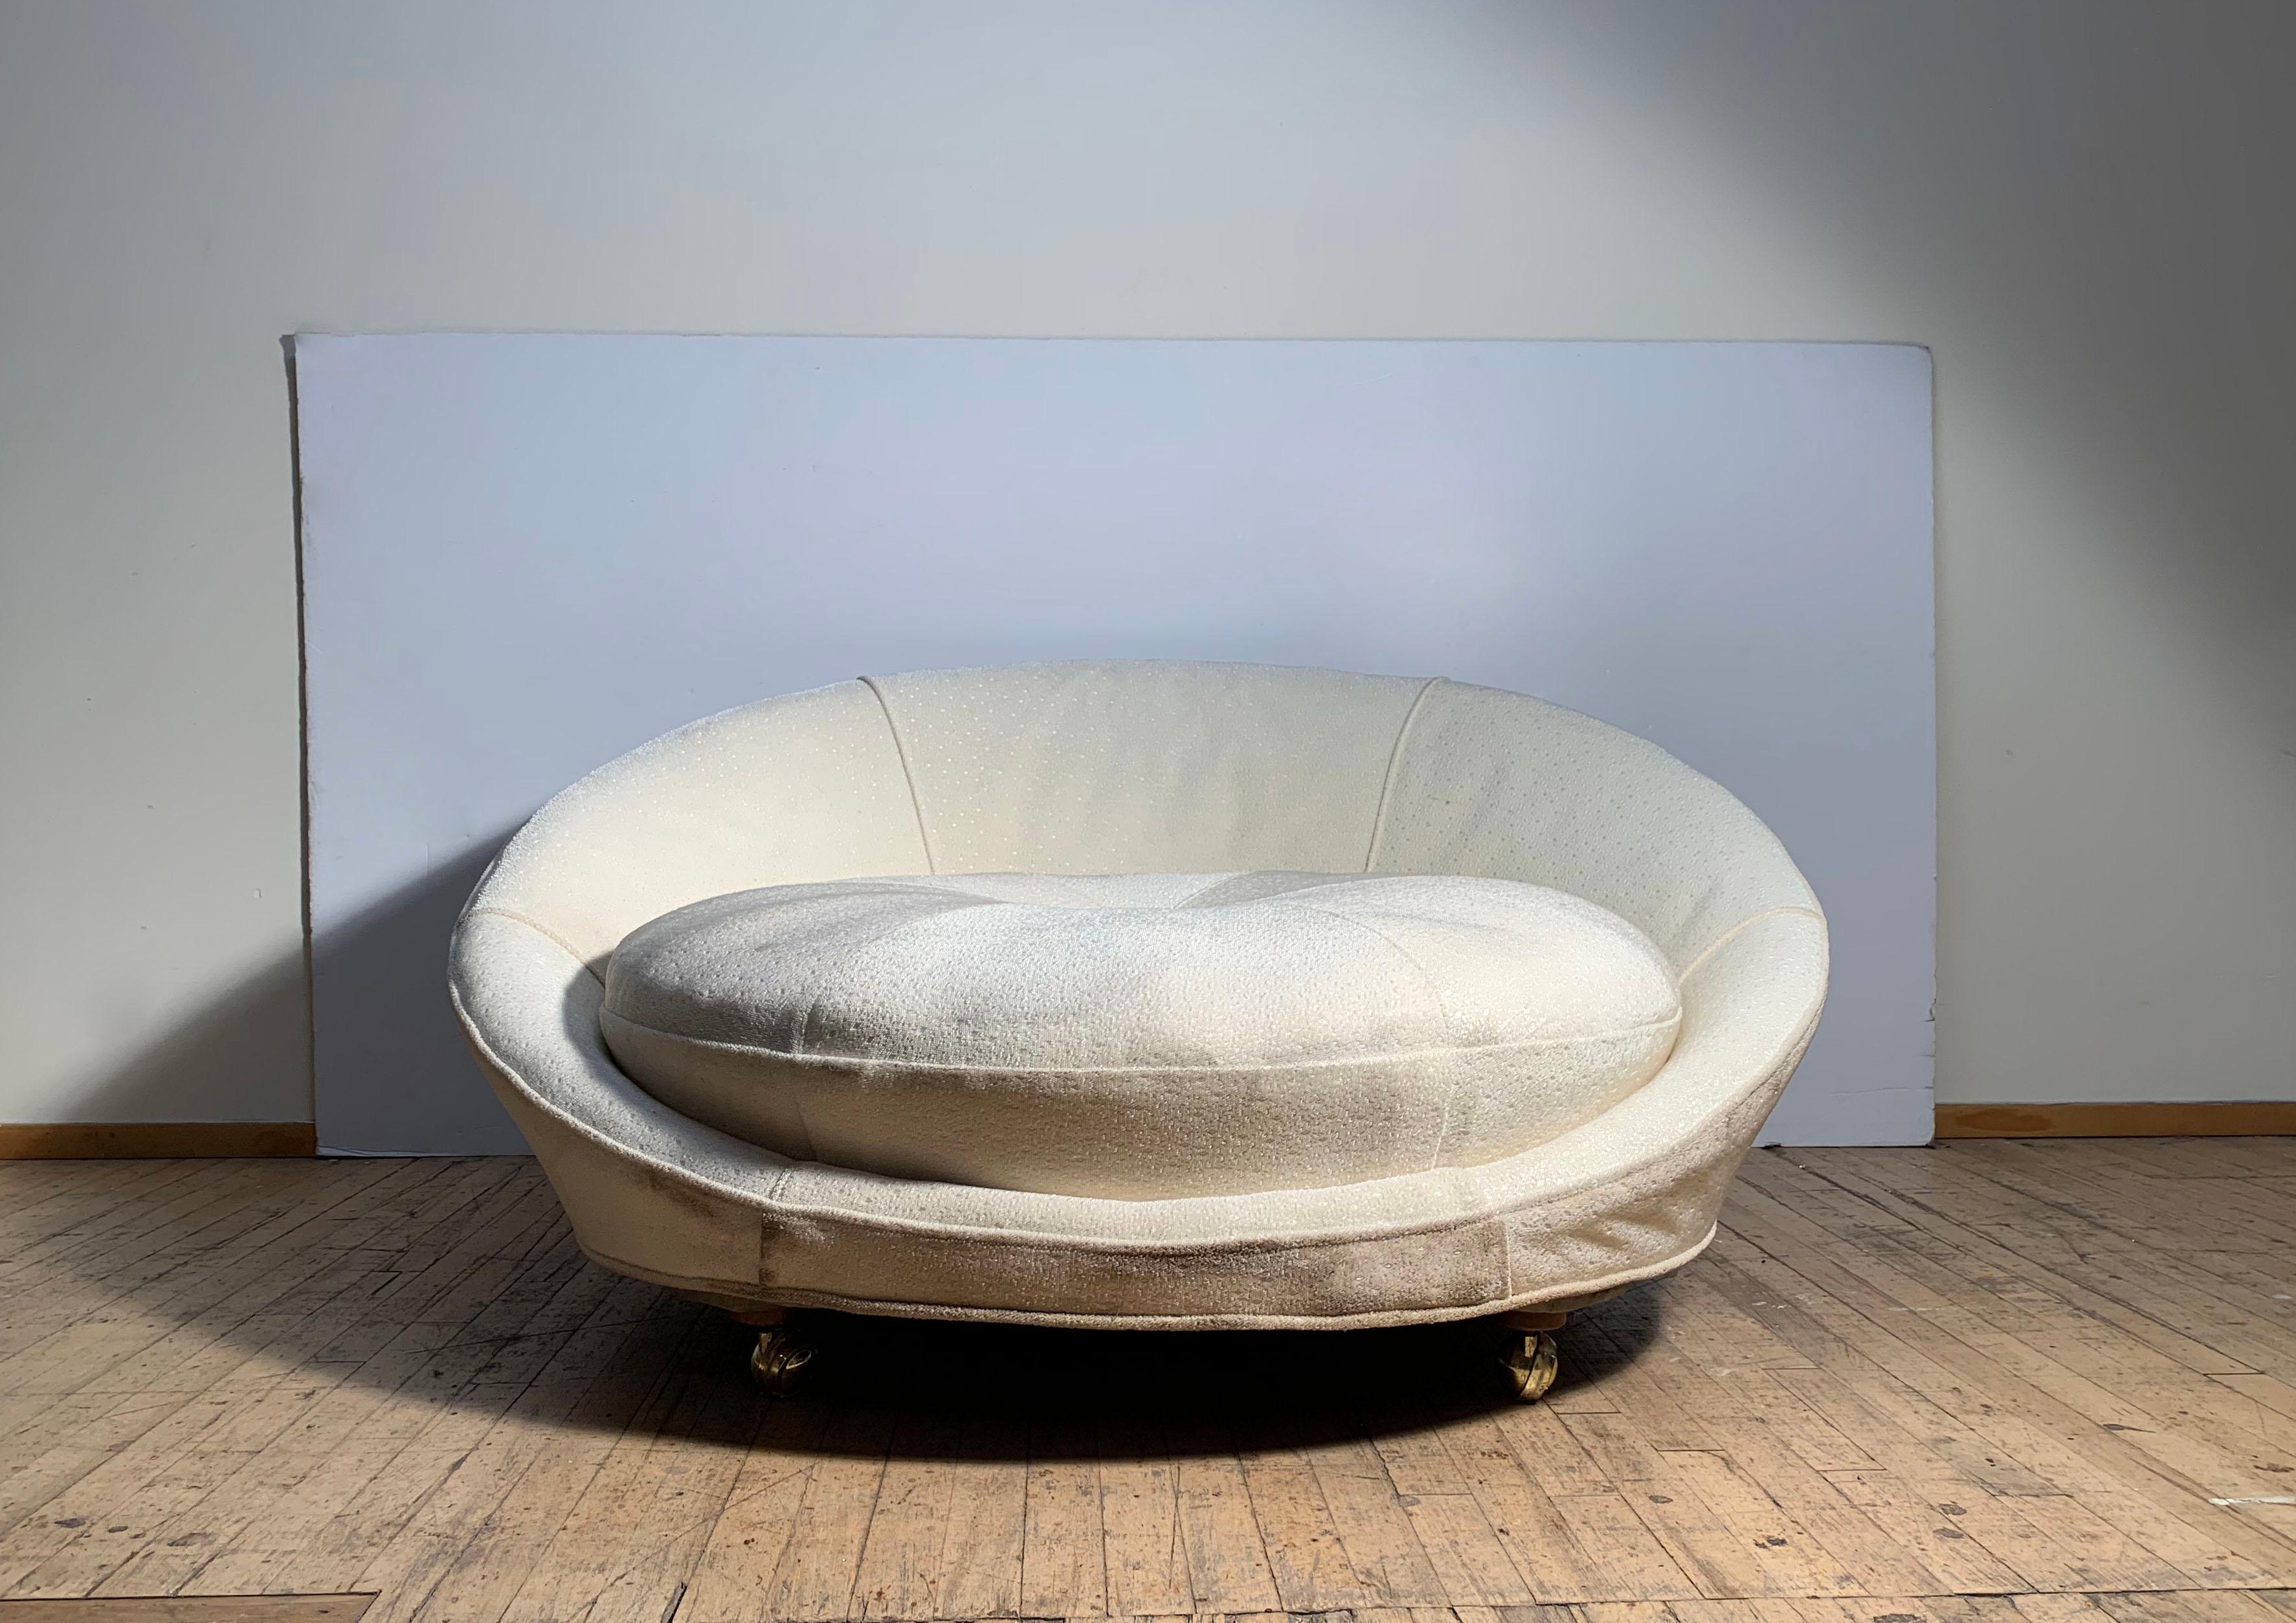 A vintage satellite sofa lounge chair in the style of Milo Baughman. Uncertain to designer. Possibly Adrian Pearsall.

This item will need to be reupholstered. Structure seems sound with working castors.